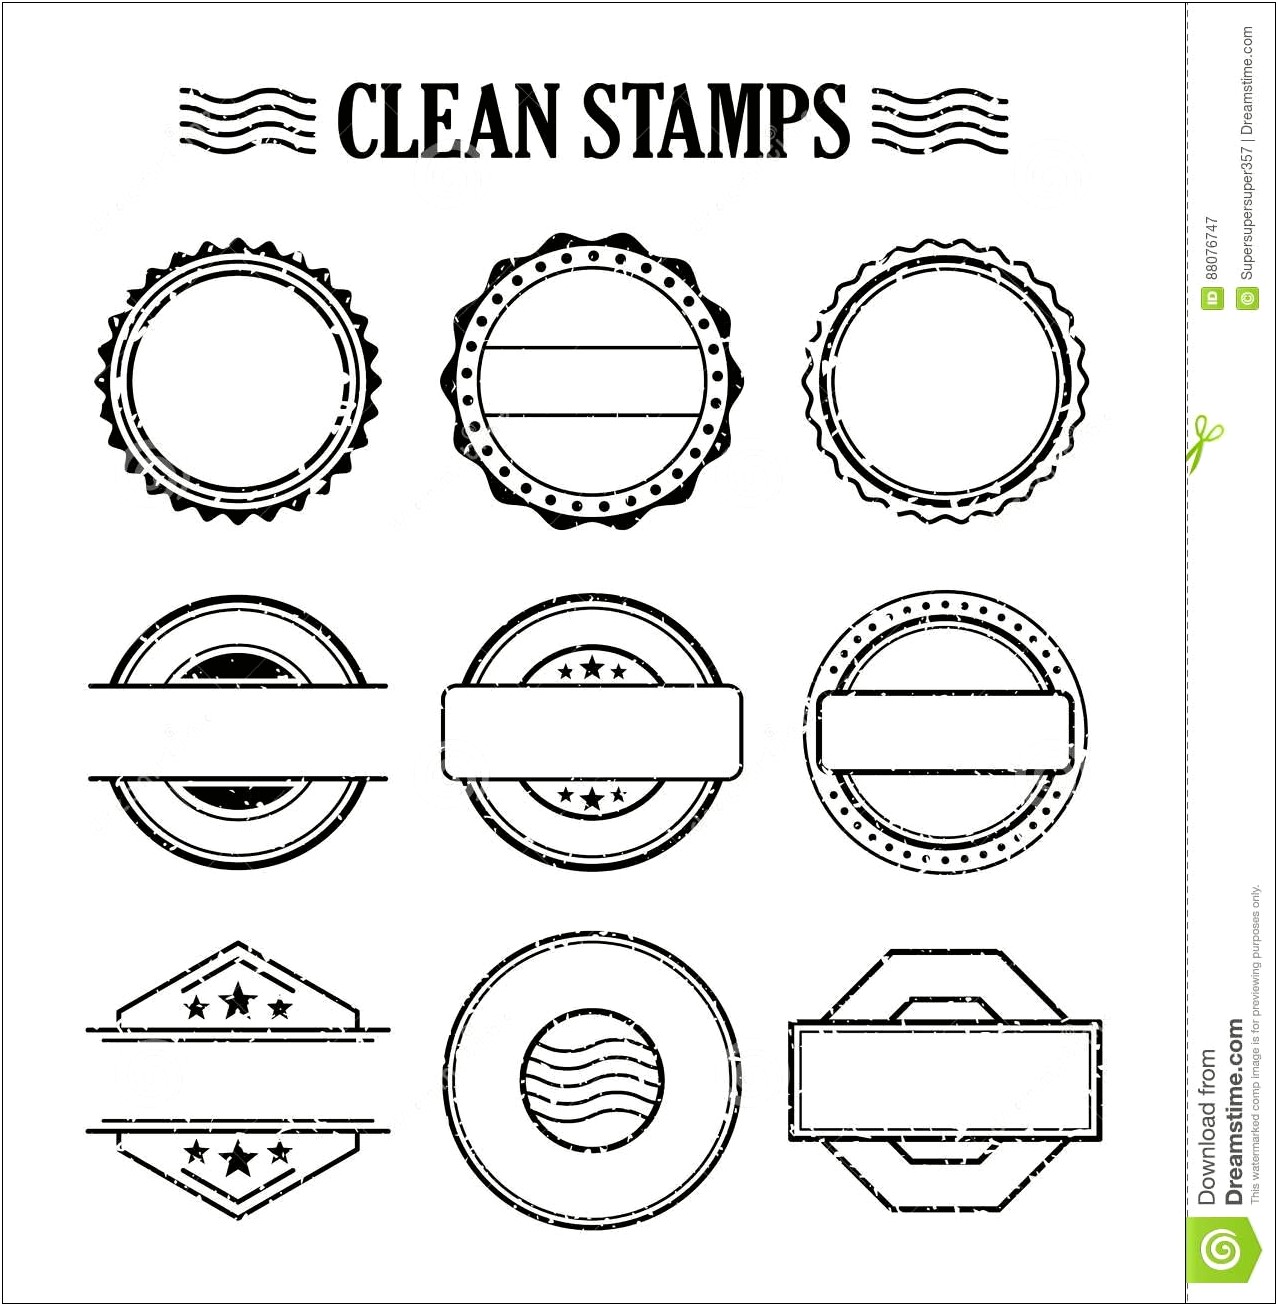 Company Rubber Stamp Template Free Download